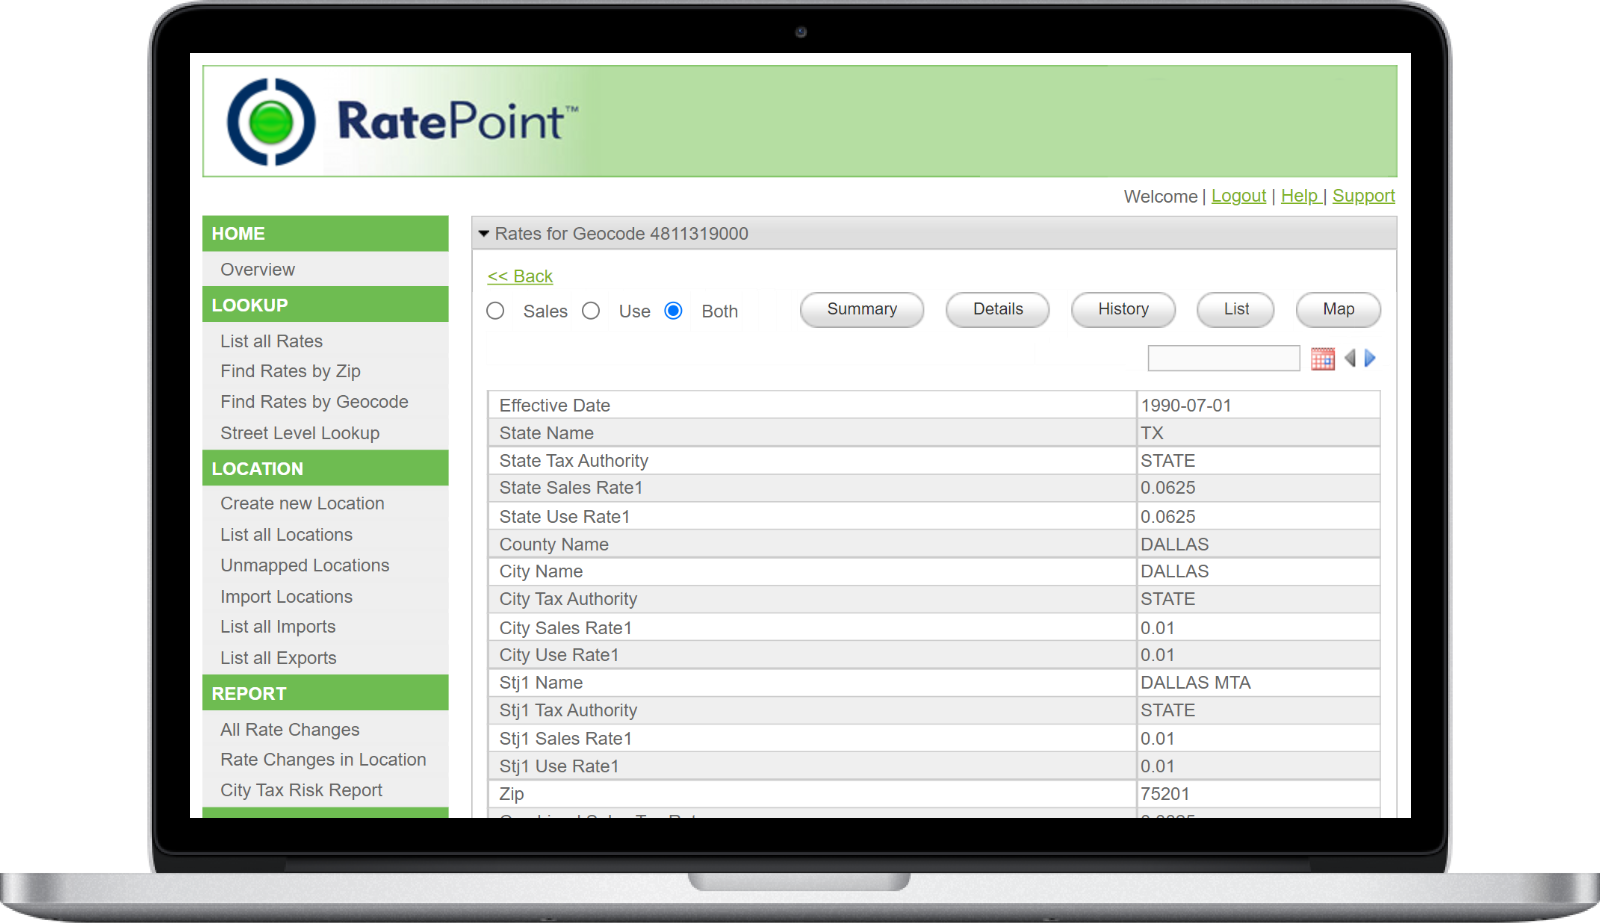 RatePoint rates by geocode